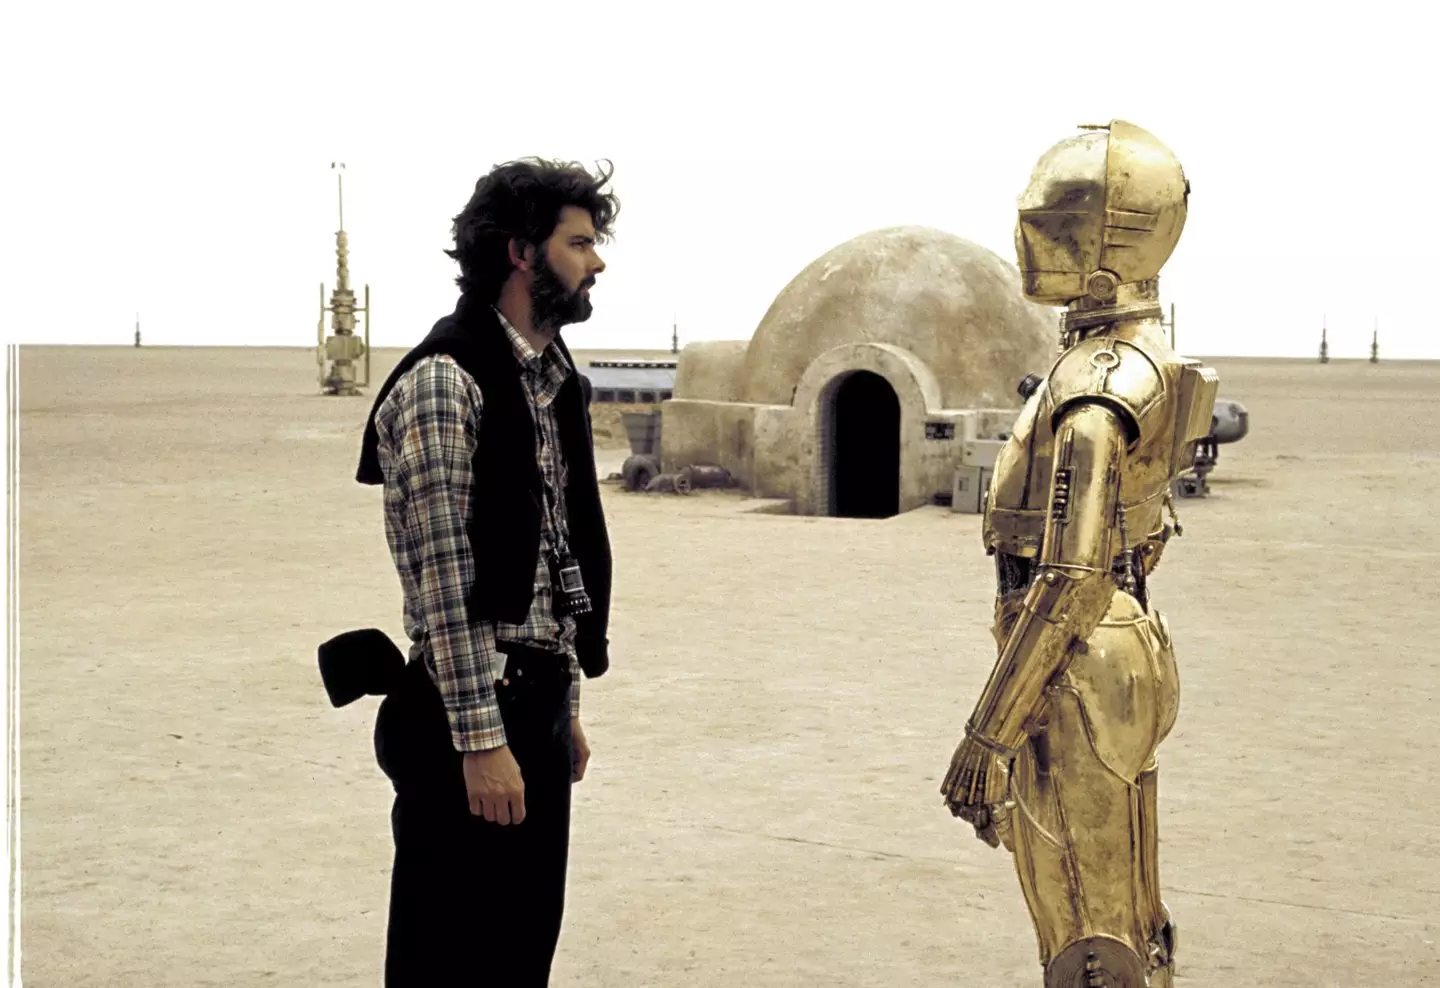 George Lucas made a fateful decision when making Star Wars that earned him billions.